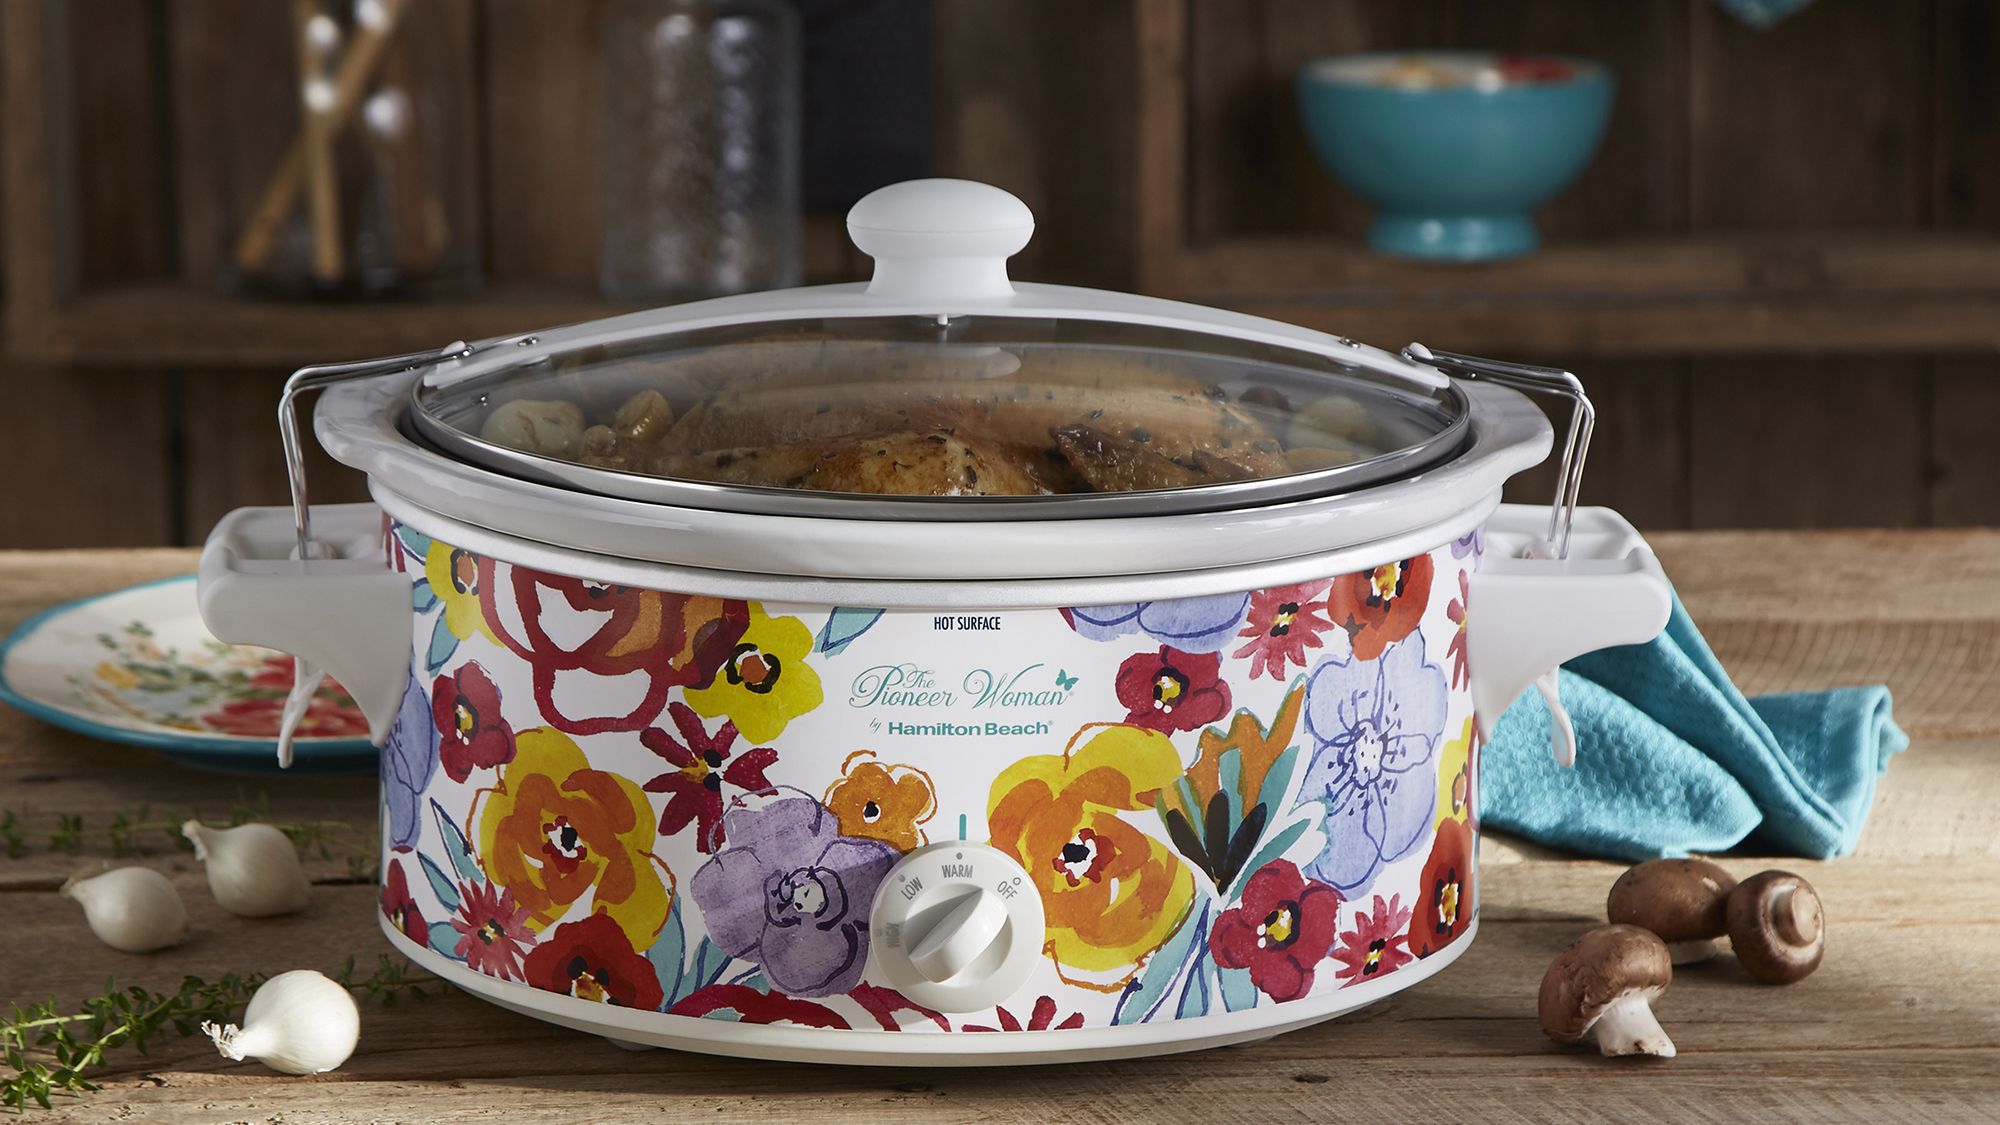 https://hips.hearstapps.com/hmg-prod/images/last-minute-mothers-day-gift-pioneer-woman-slow-cooker-1556900325.jpeg?crop=1xw:0.8327165062916358xh;center,top